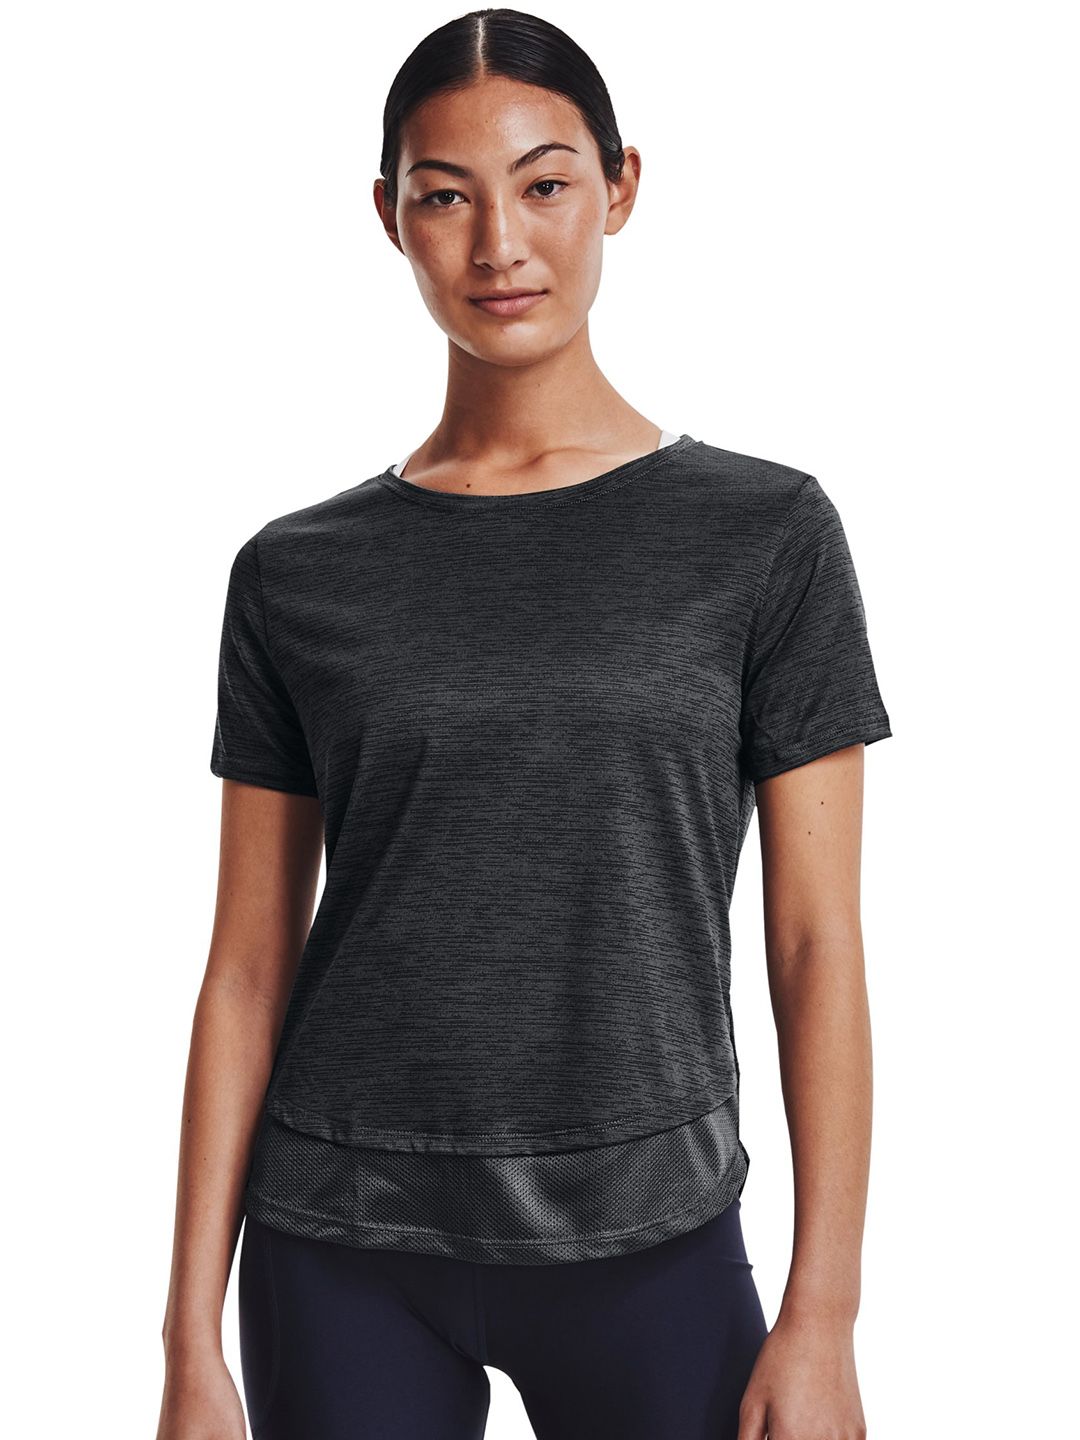 UNDER ARMOUR Women Grey Self Designed T-shirt Price in India